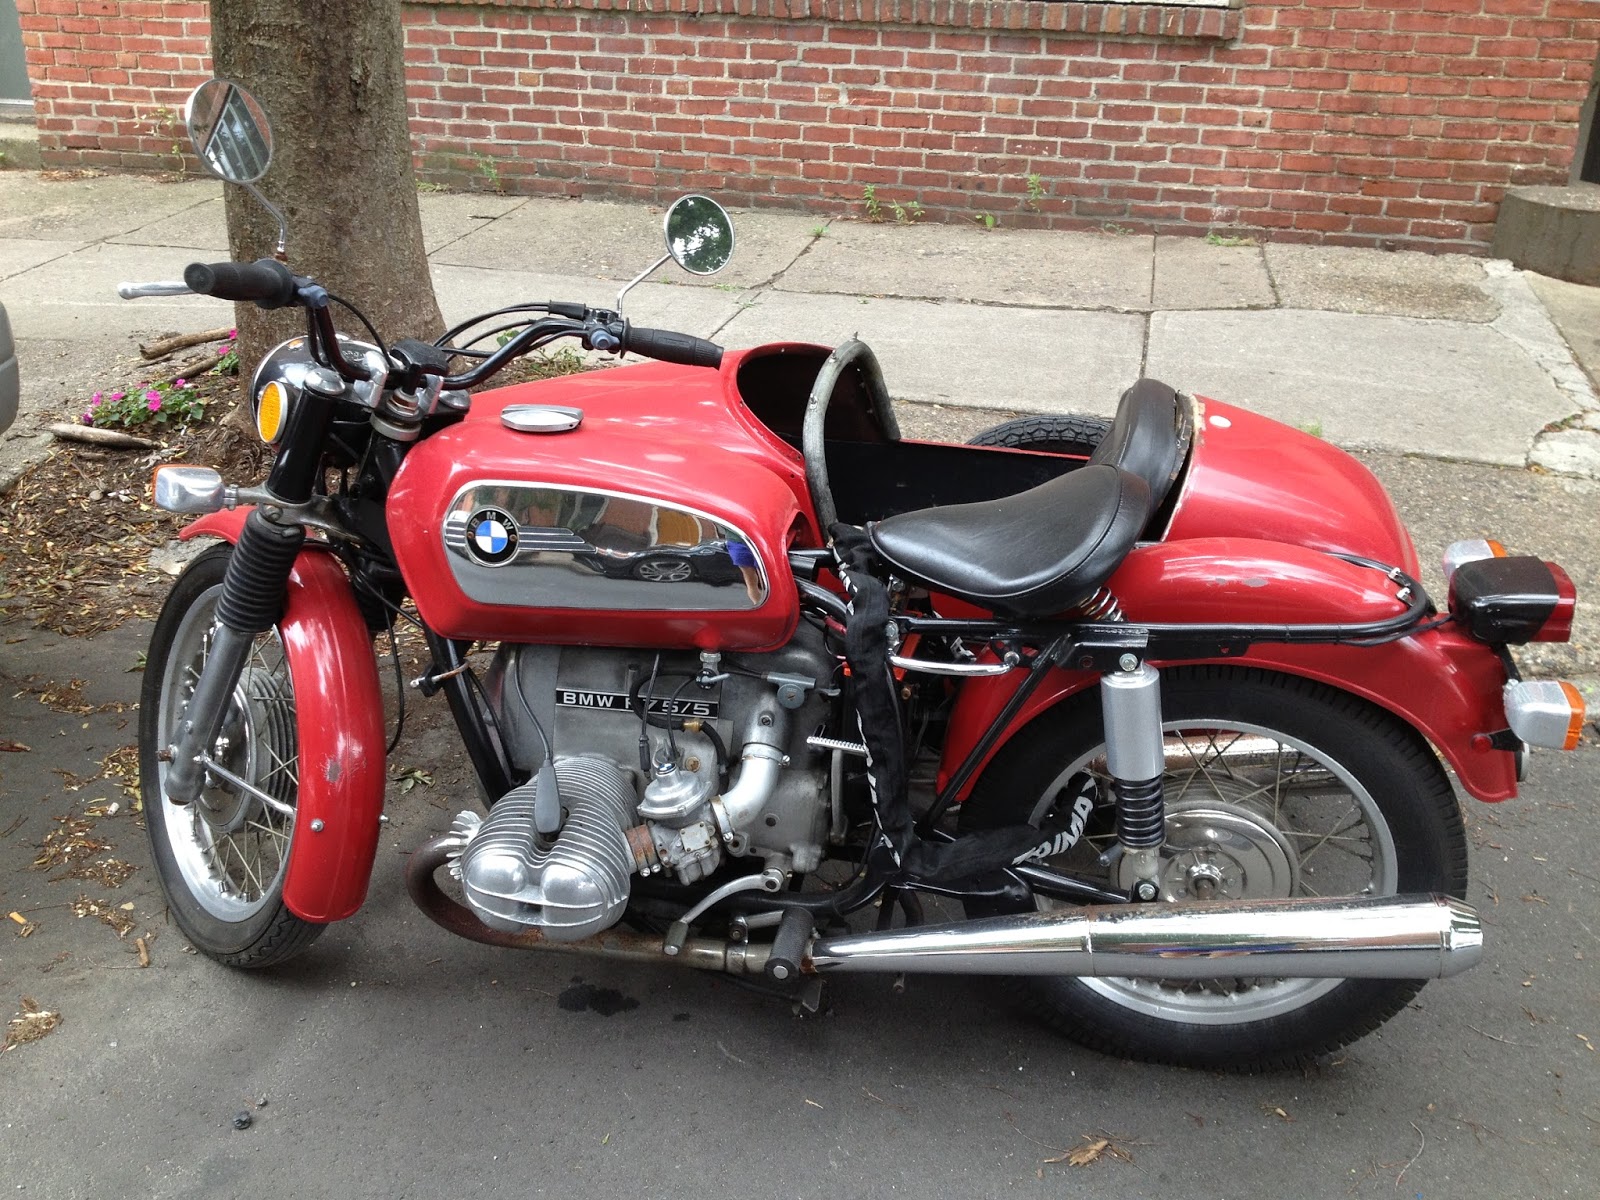 SHHHHH...: Vintage BMW Motorcycle and Sidecar